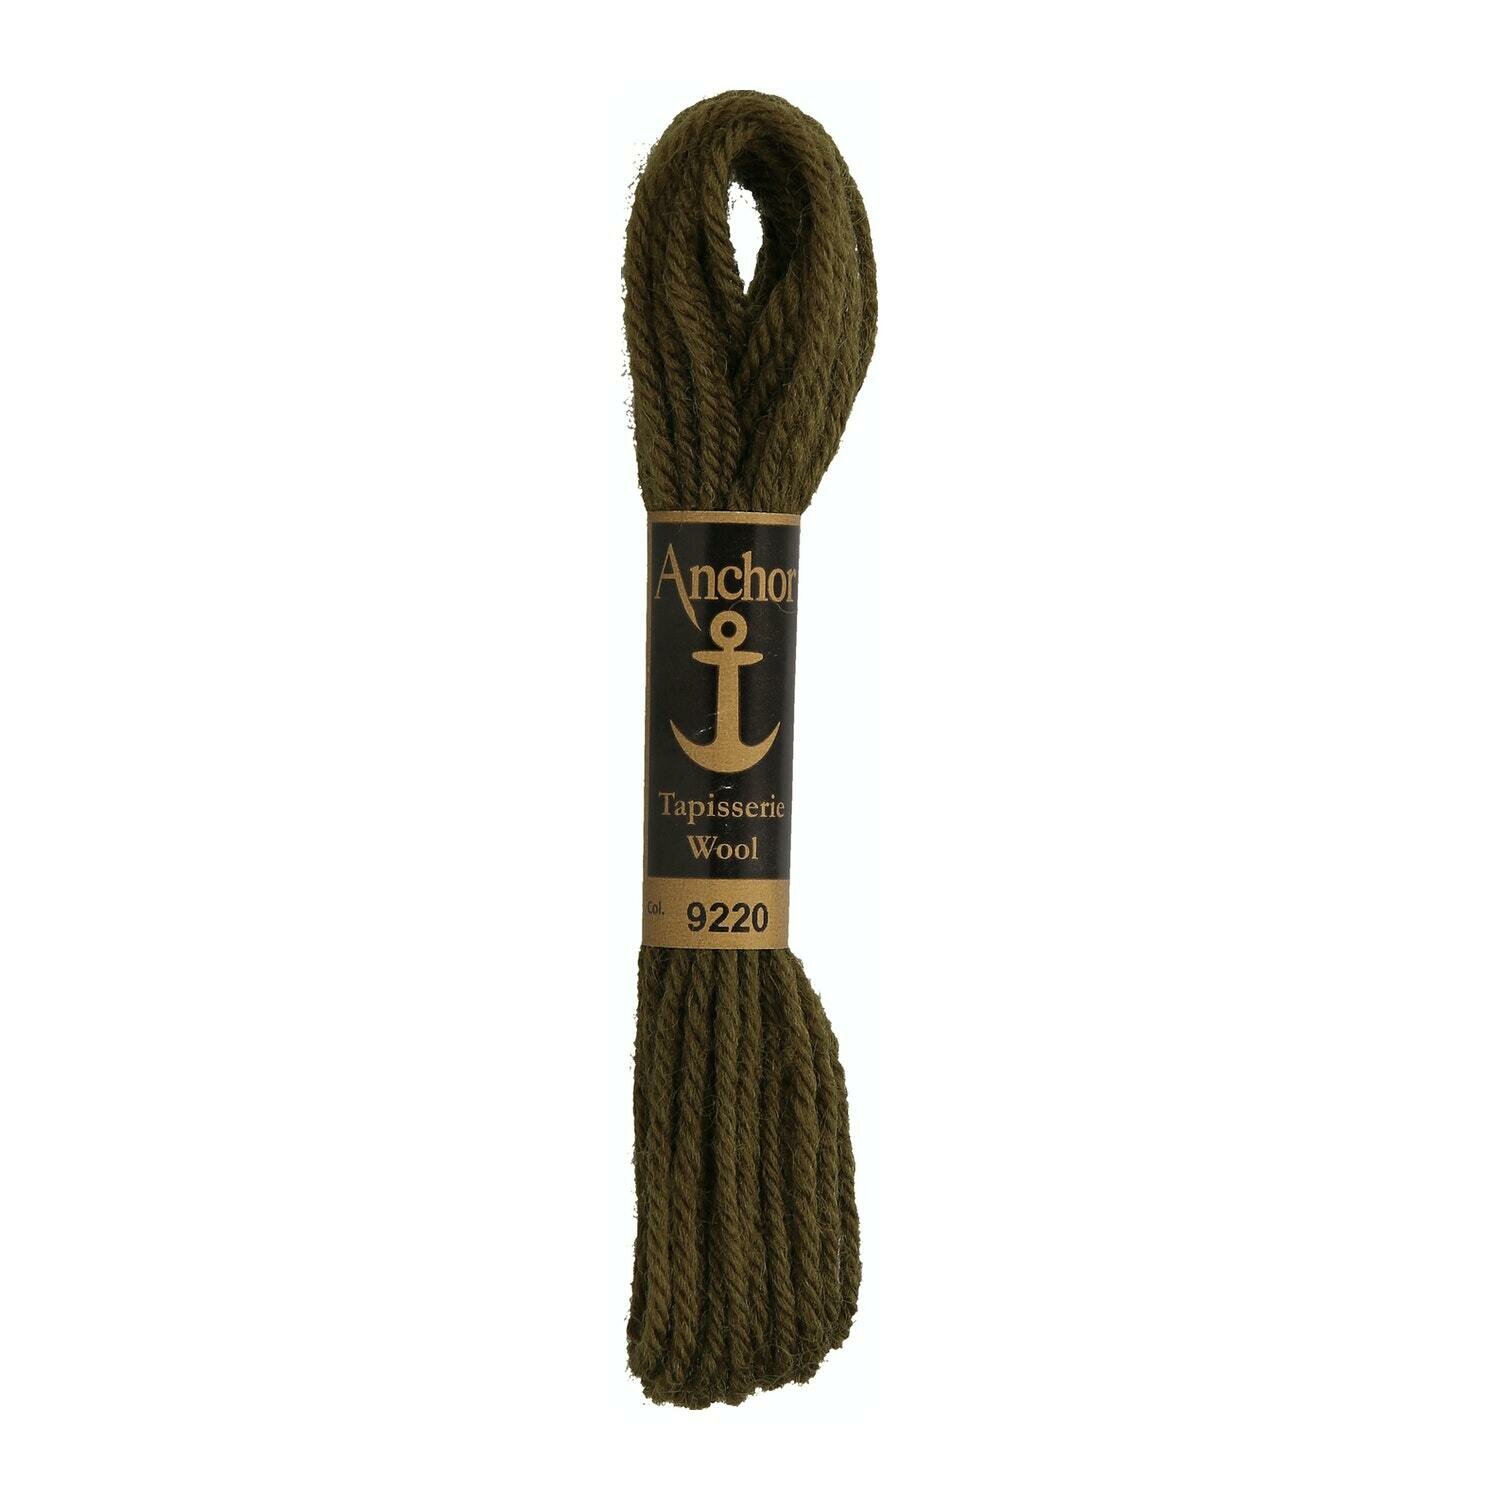 Anchor Tapisserie Wool # 09220